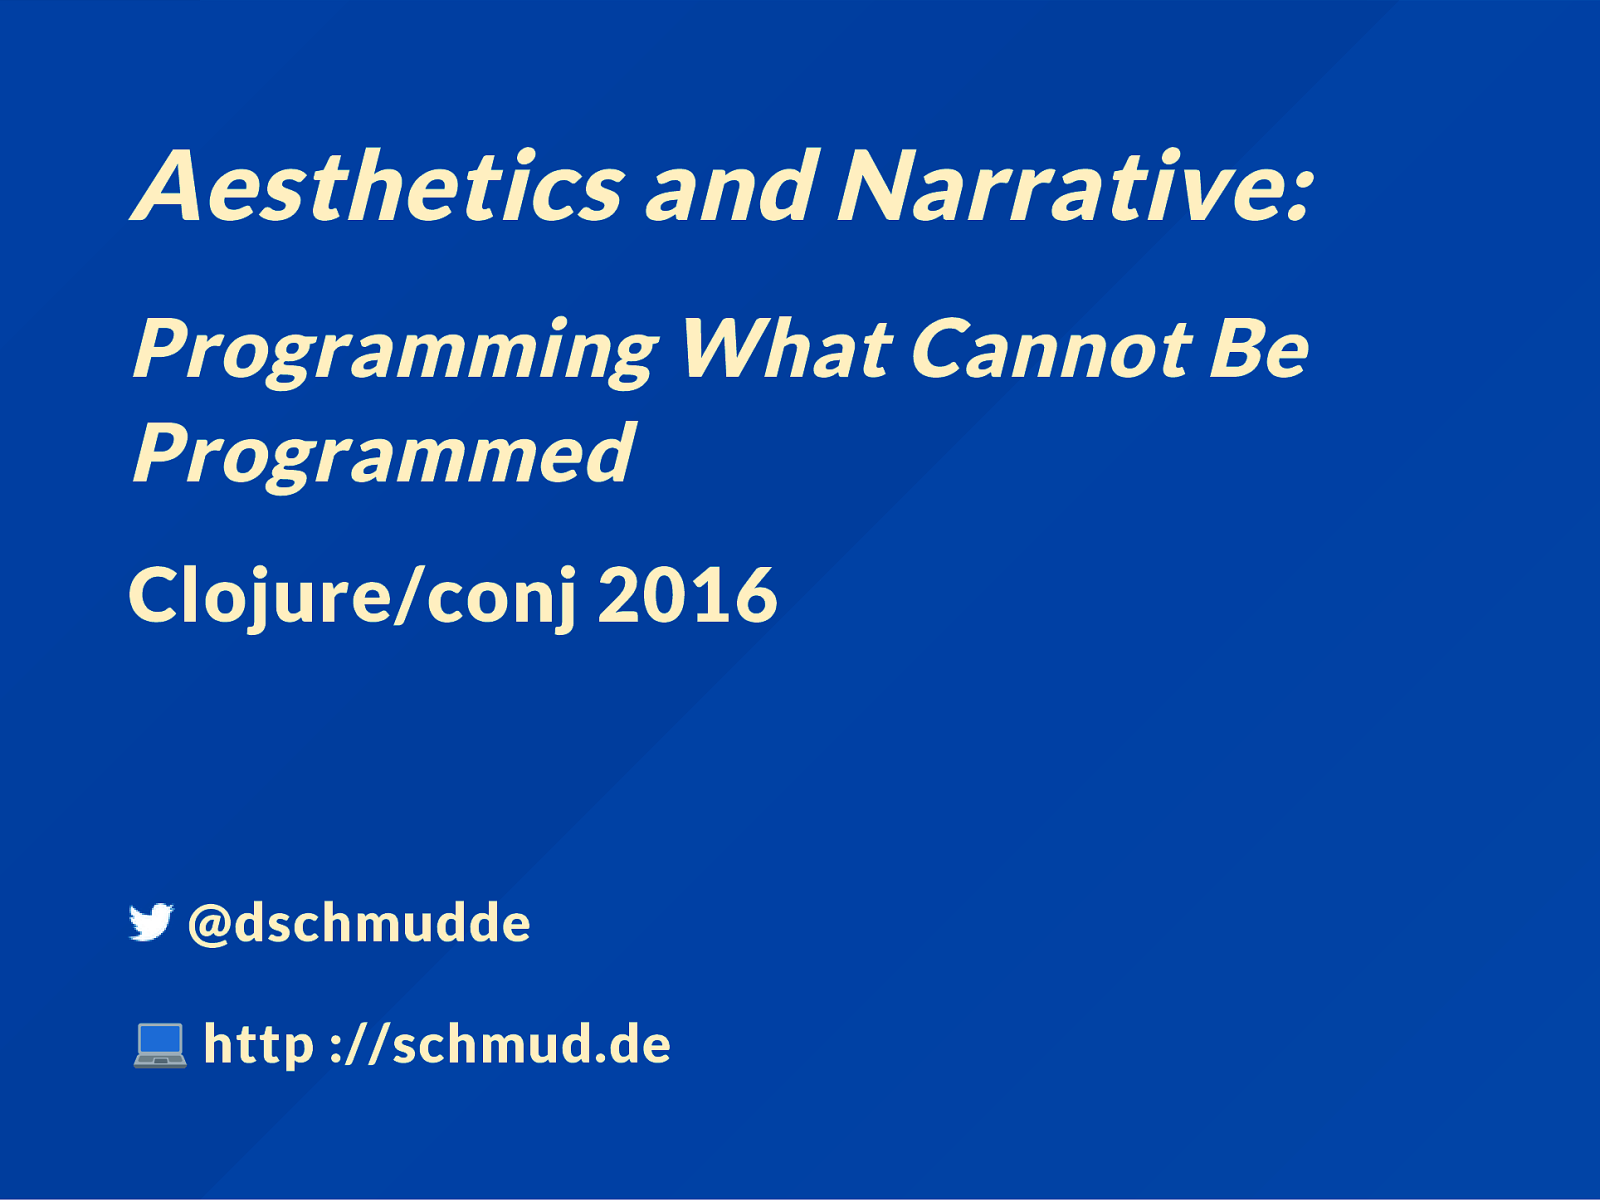 Aesthetics and Narrative: Programming What Cannot Be Programmed